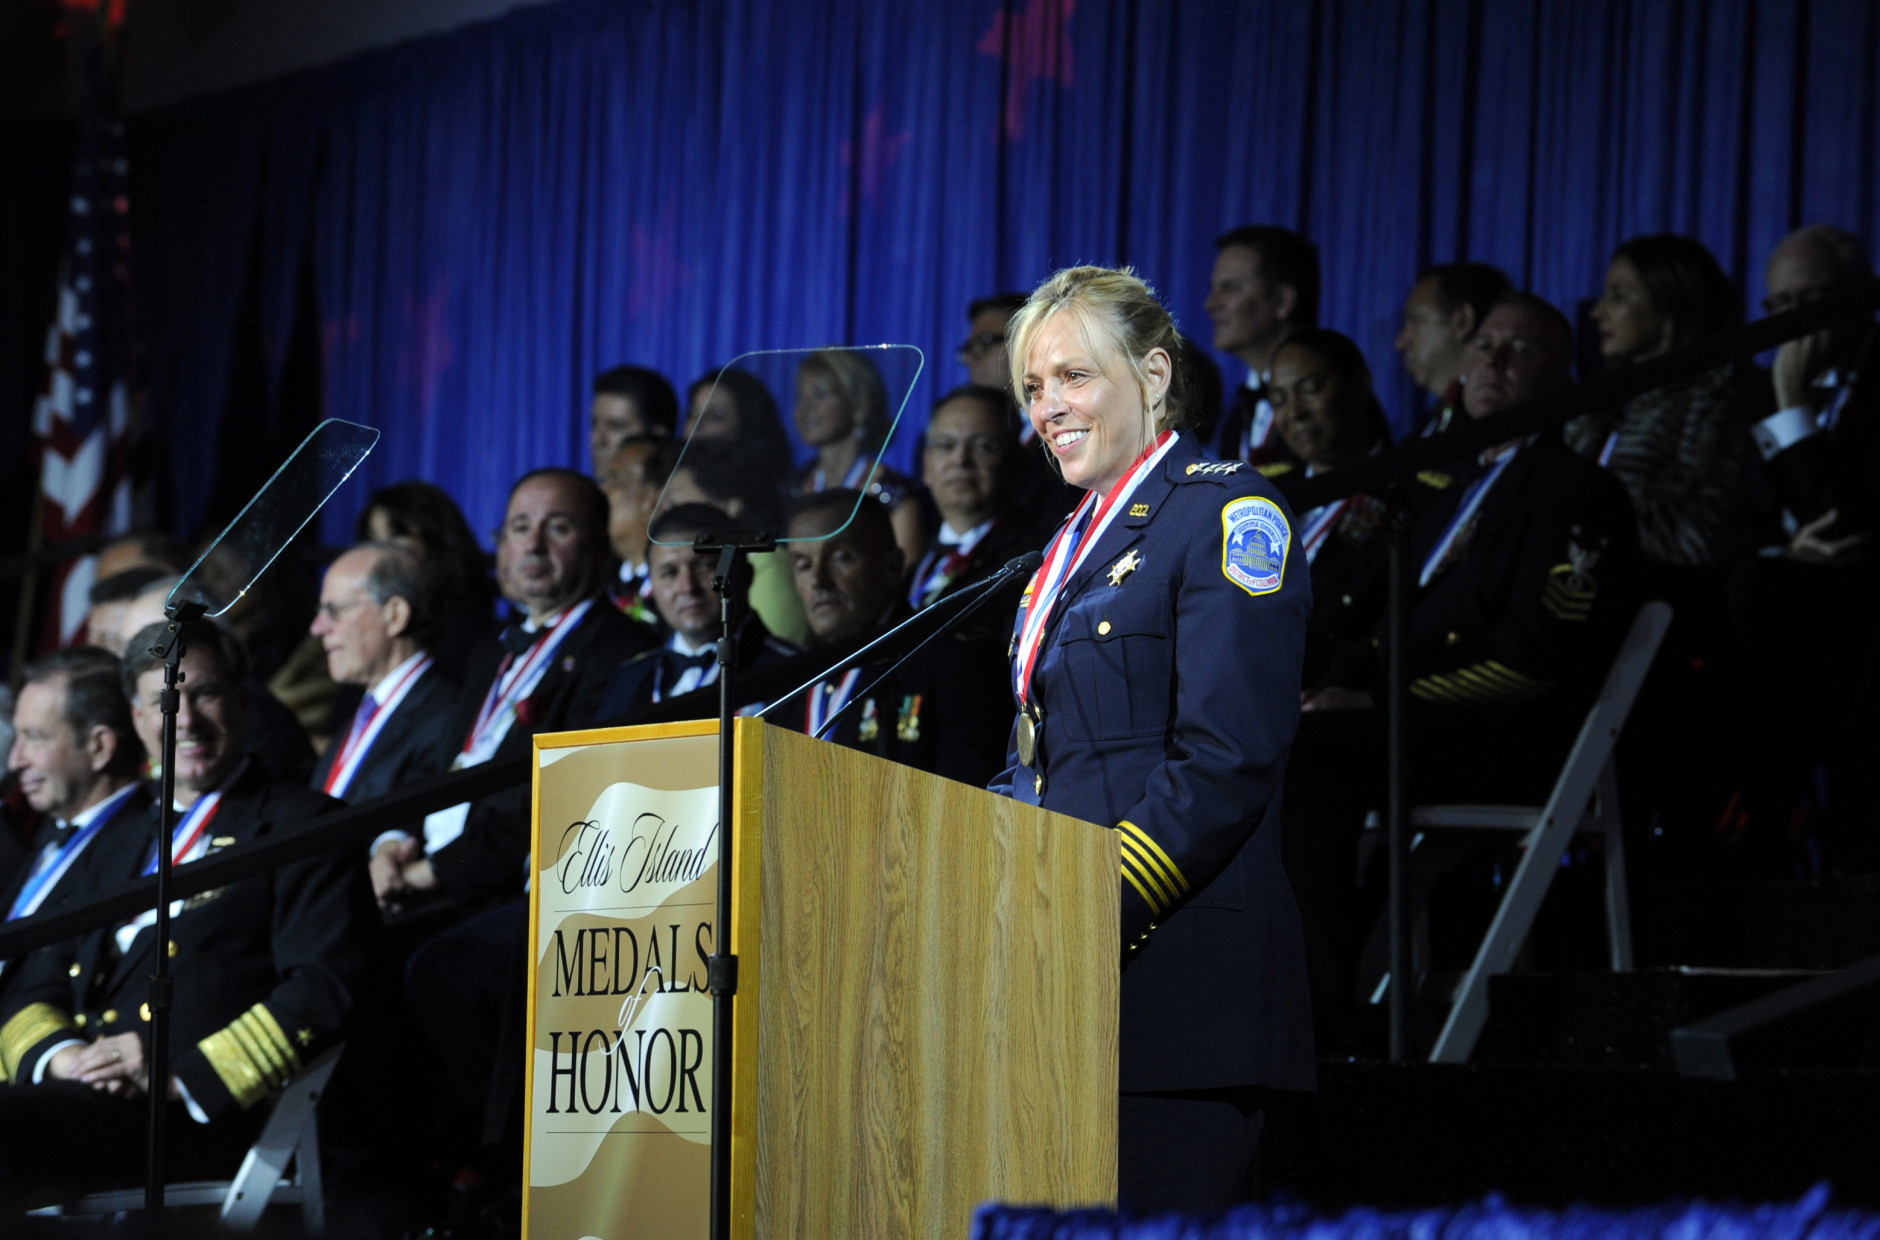 IMAGE DISTRIBUTED FOR NECO - Washington, D.C. Police Chief Cathy L. Lanier speaks at the National Ethnic Coalition of Organizations' 2015 Ellis Island Medal of Honor awards ceremony on Ellis Island, Saturday, May 9, 2015.  NECO honored Lanier as one of 101 recipients, including New York Yankees legend Mariano Rivera, journalist Meredith Vieira, and 11 members of the U.S. military.  NECO's mission is to honor and preserve the diversity of the American people and to foster tolerance, respect and understanding among religious and ethnic groups. (Photo by Diane Bondareff/Invision for NECO/AP Images)